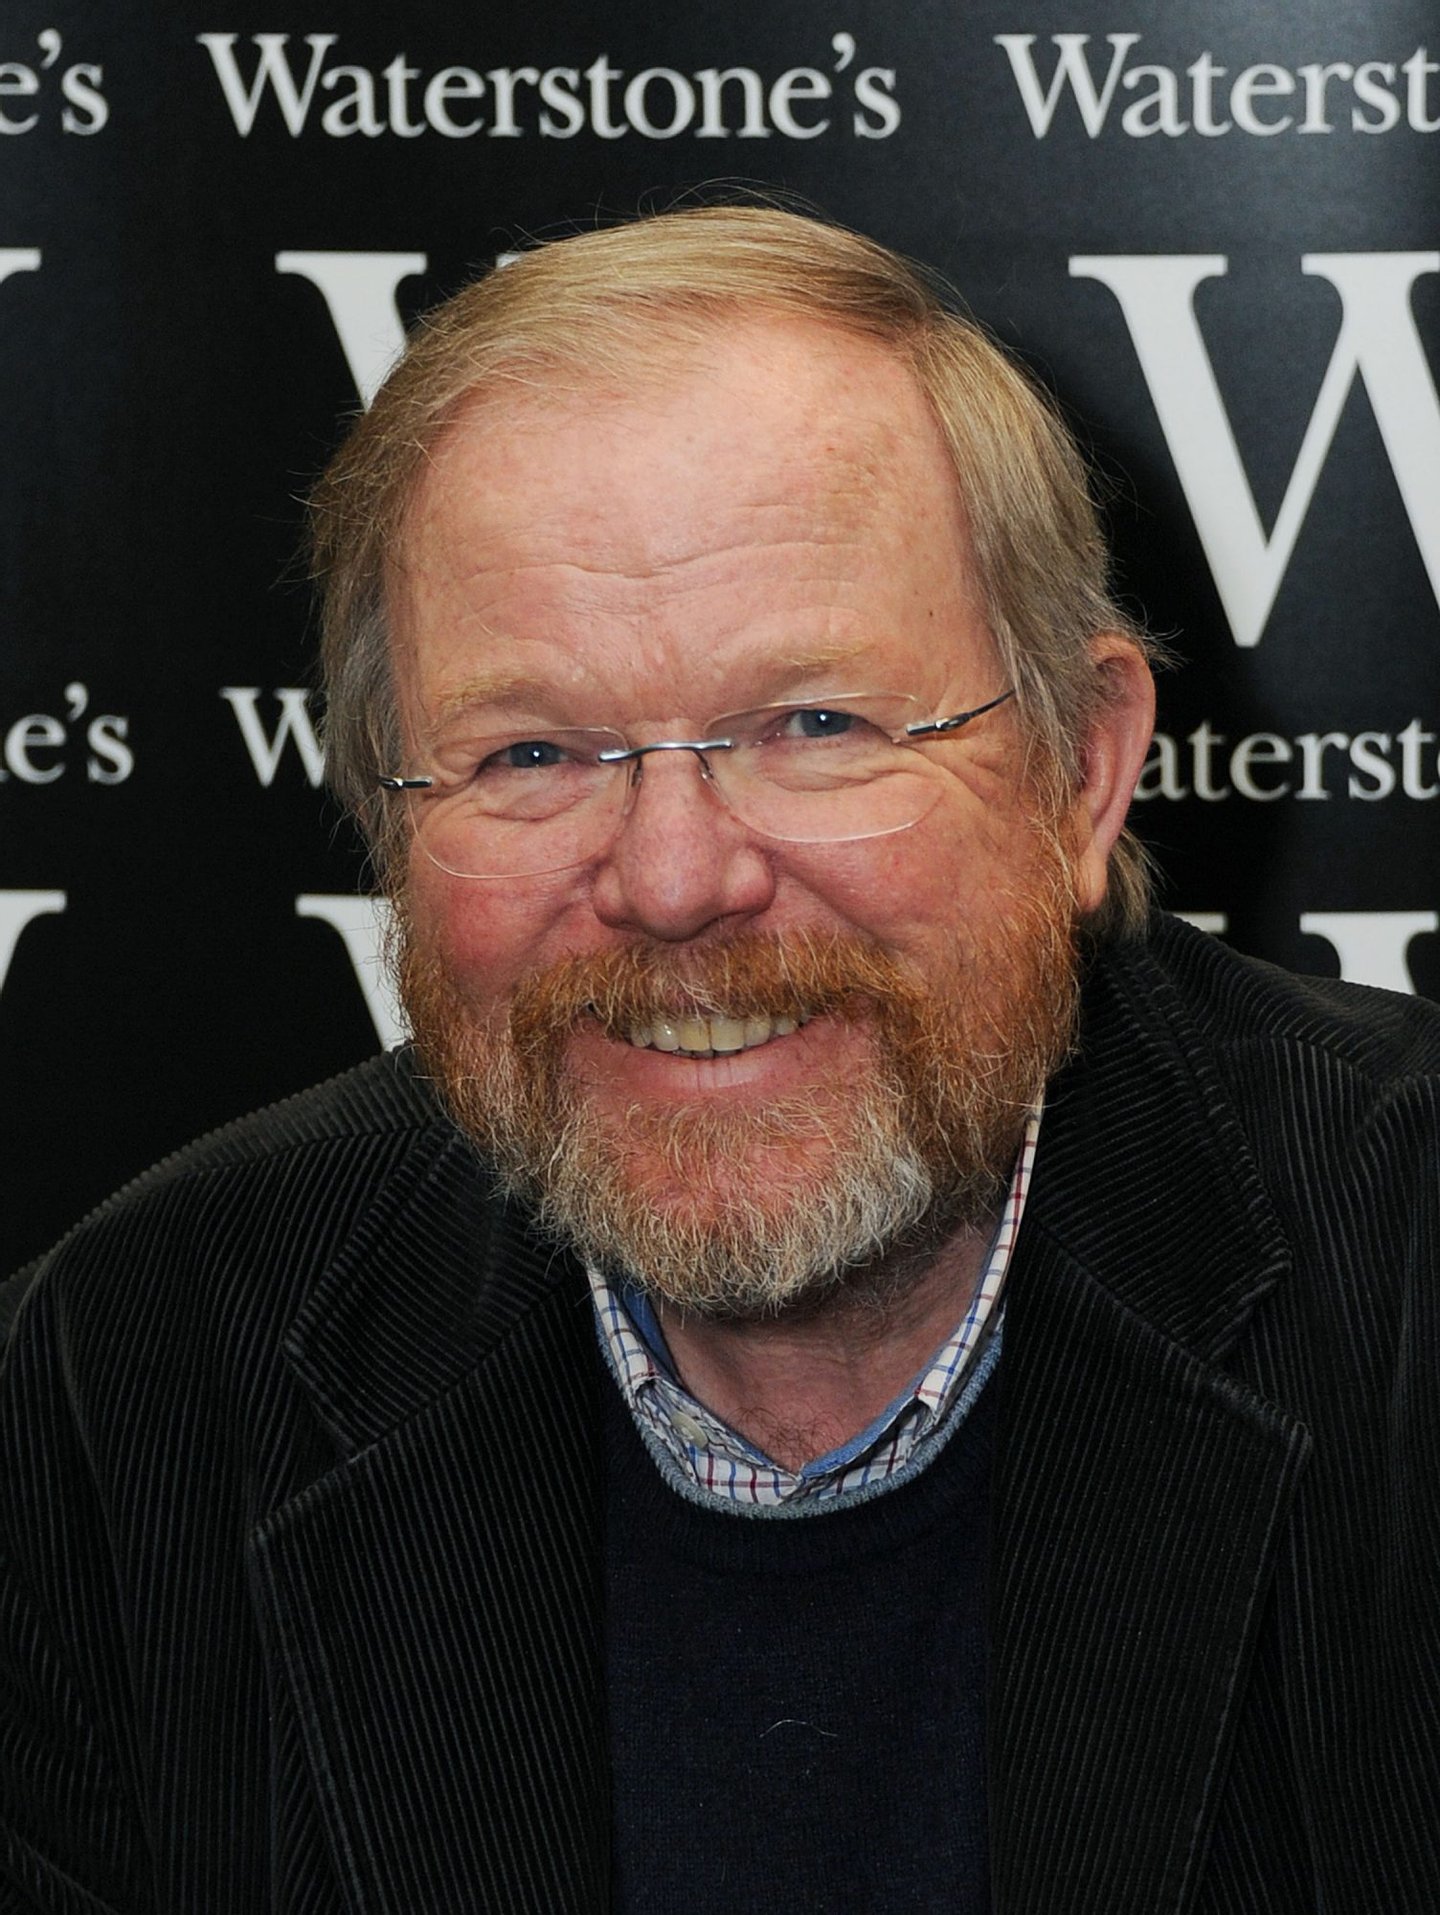 LONDON, UNITED KINGDOM - NOVEMBER 29: Bill Bryson poses as he meets fans and signs copies of his latest book 'One Summer: America 1927' at Waterstones on November 29, 2013 in London, England. (Photo by Stuart C. Wilson/Getty Images)